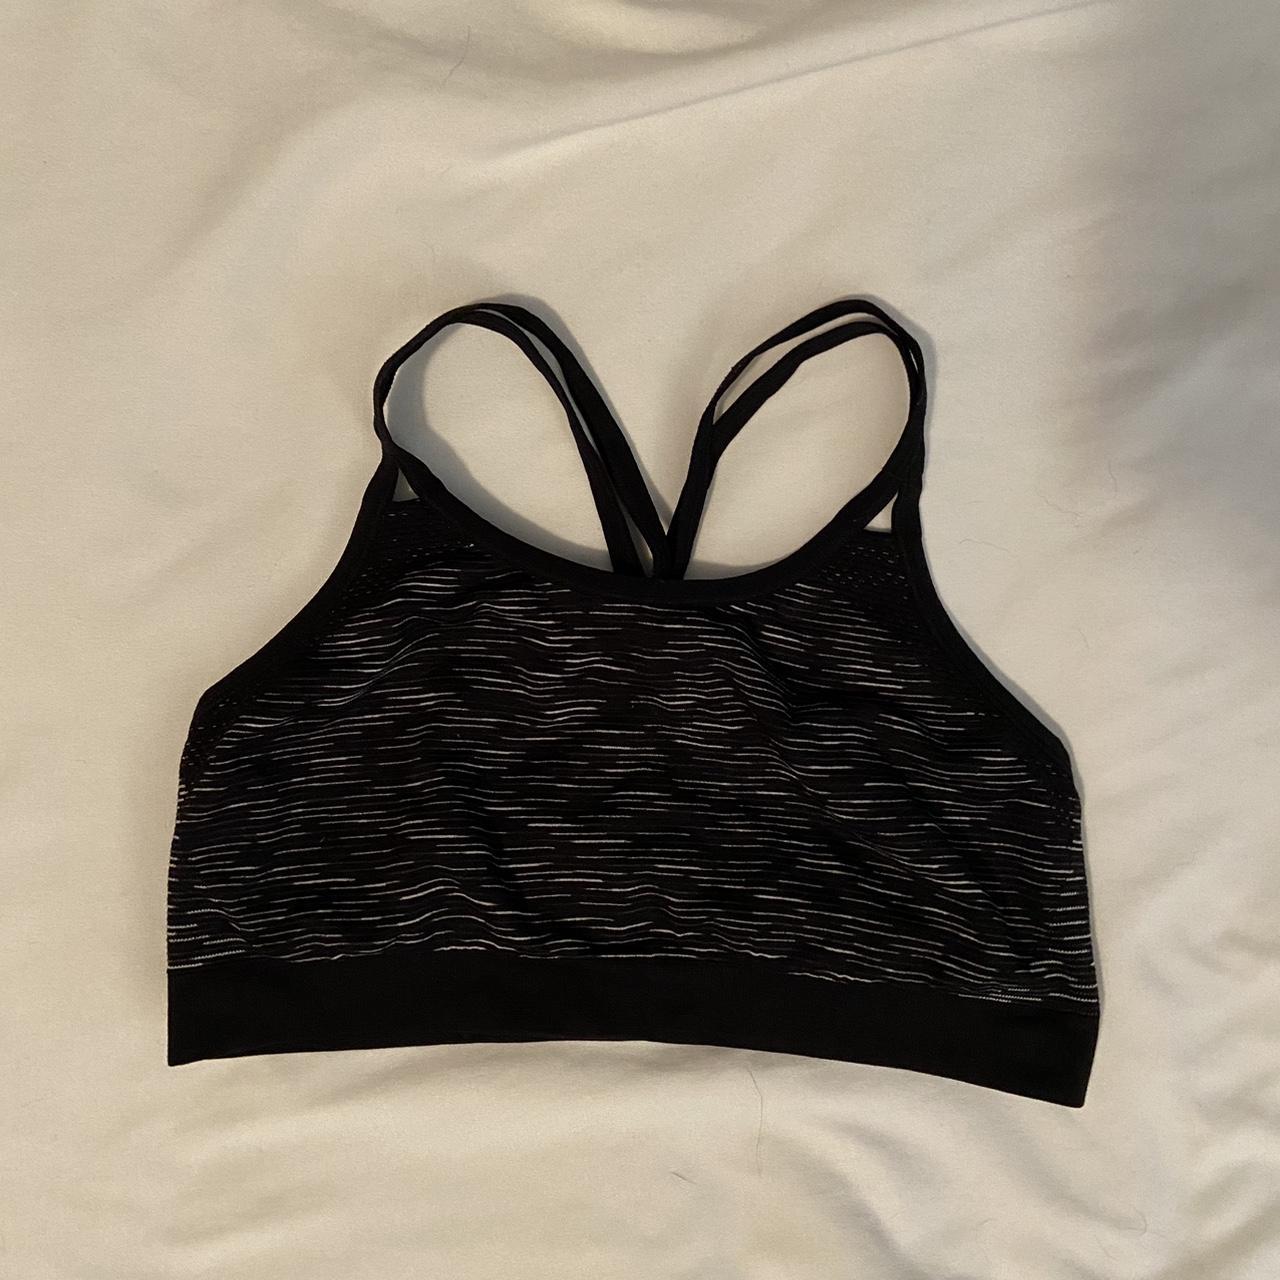 This Athletic Works Women's Sports Bra in size Large - Depop